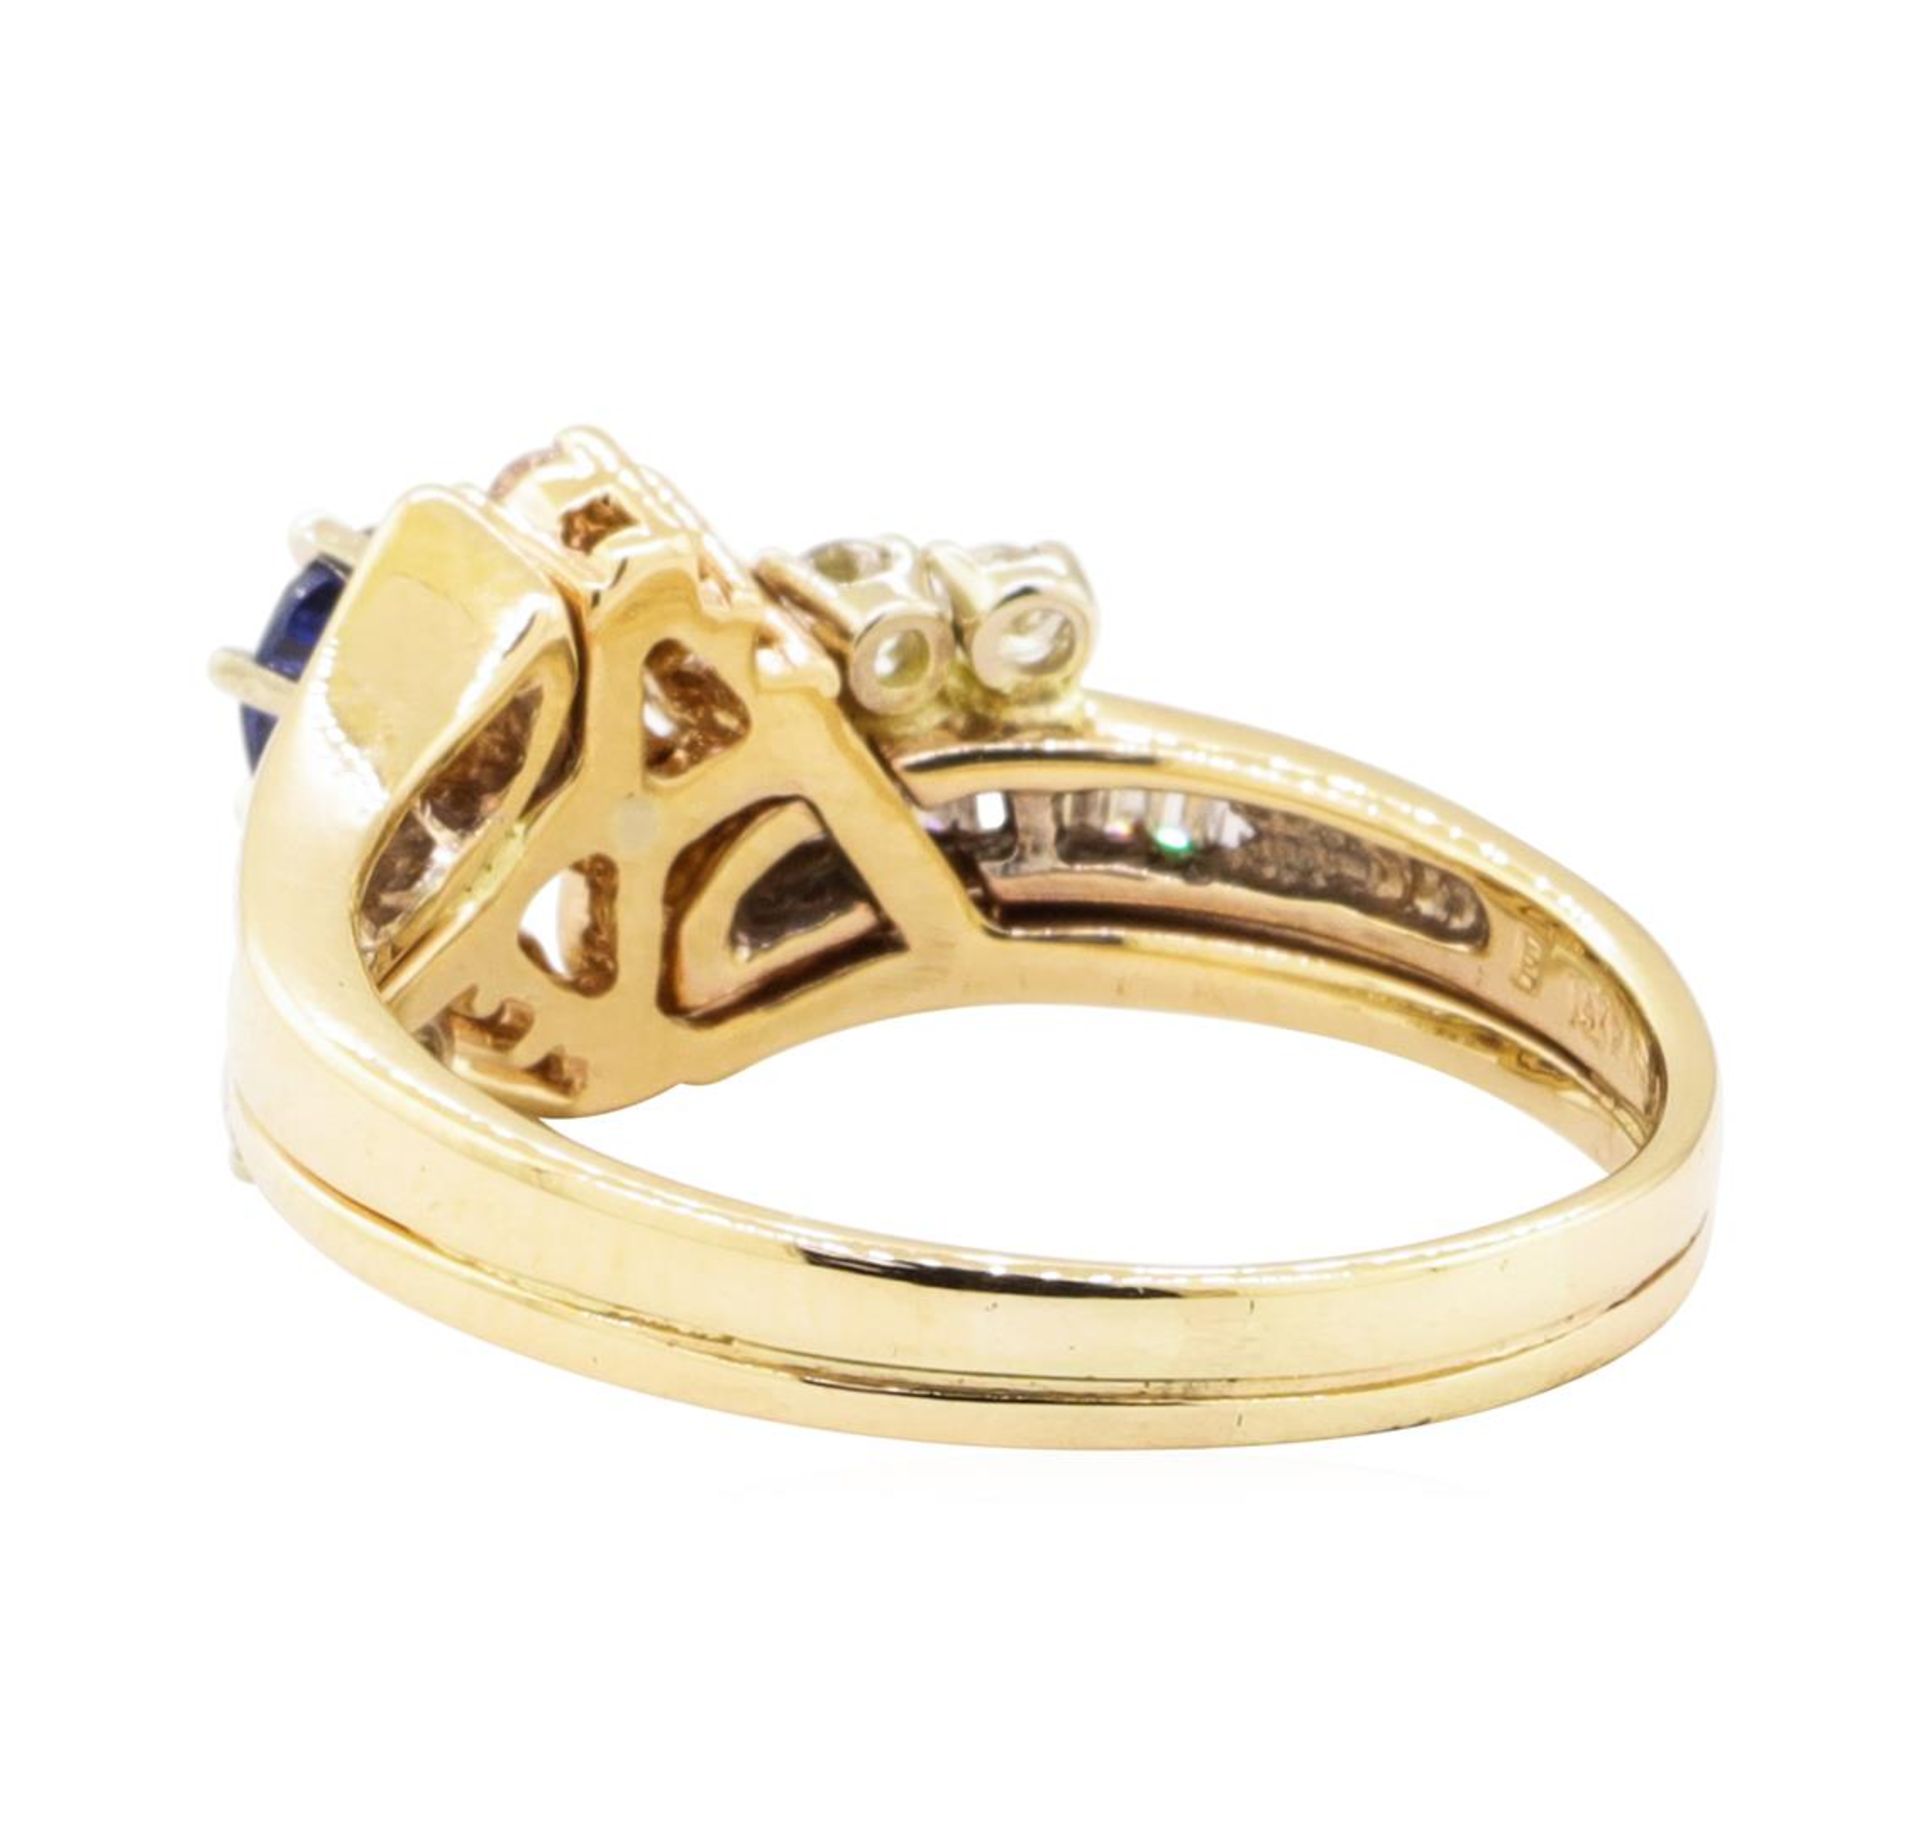 1.10 ctw Blue Sapphire and Diamond Ring - 14KT Yellow Gold - Image 3 of 4